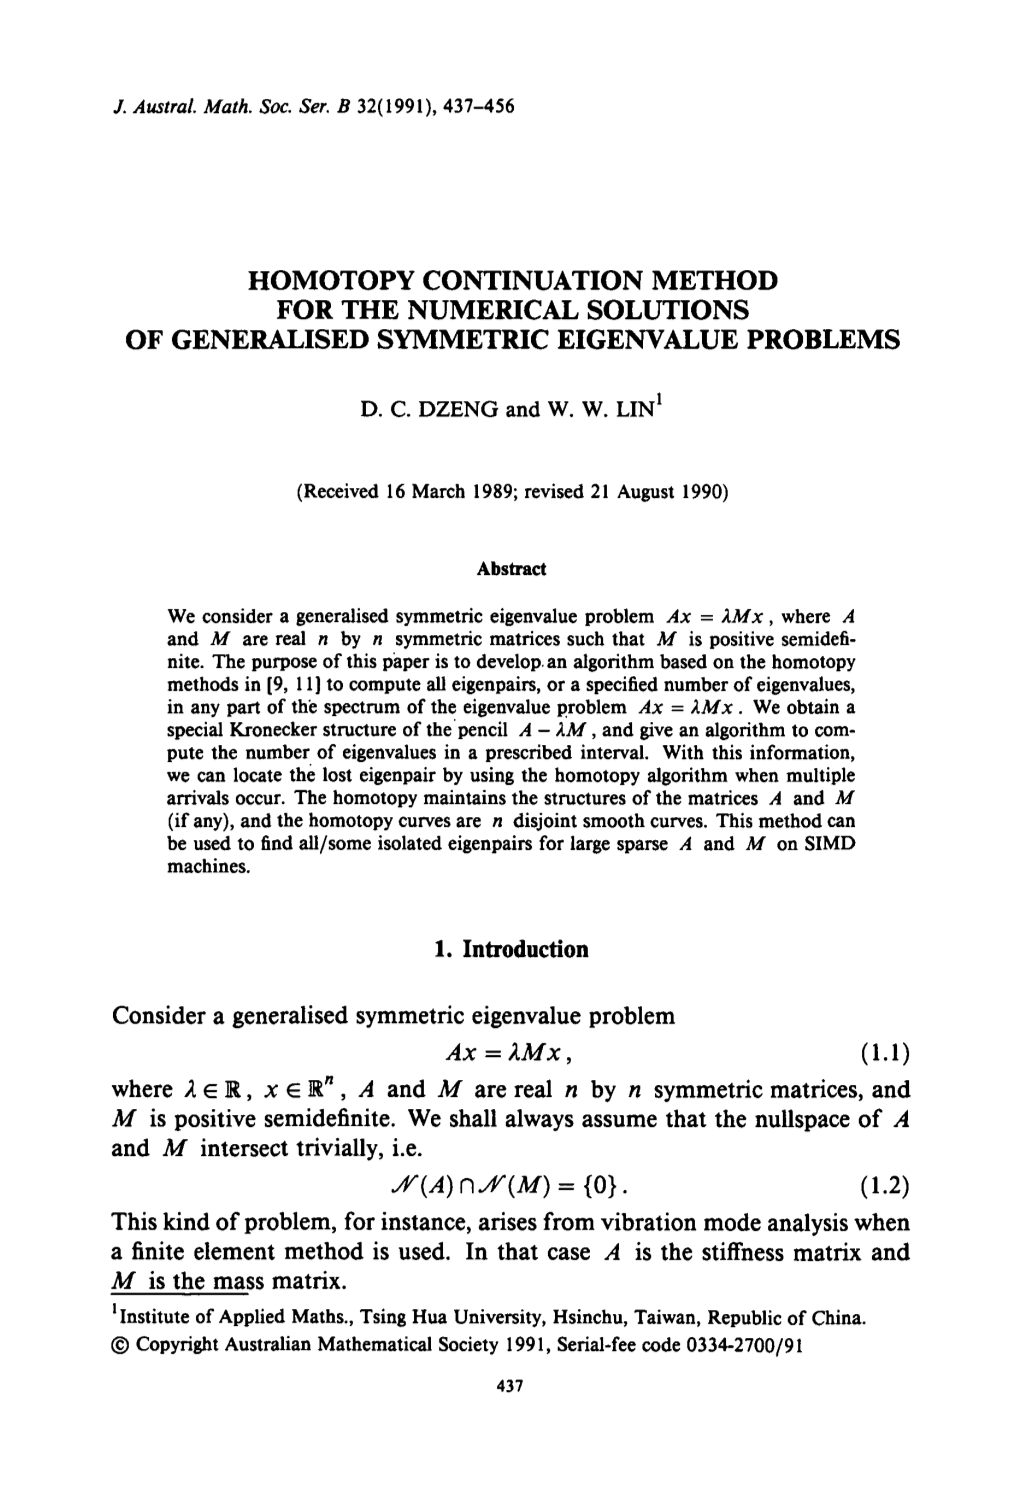 Homotopy Continuation Method for the Numerical Solutions of Generalised Symmetric Eigenvalue Problems